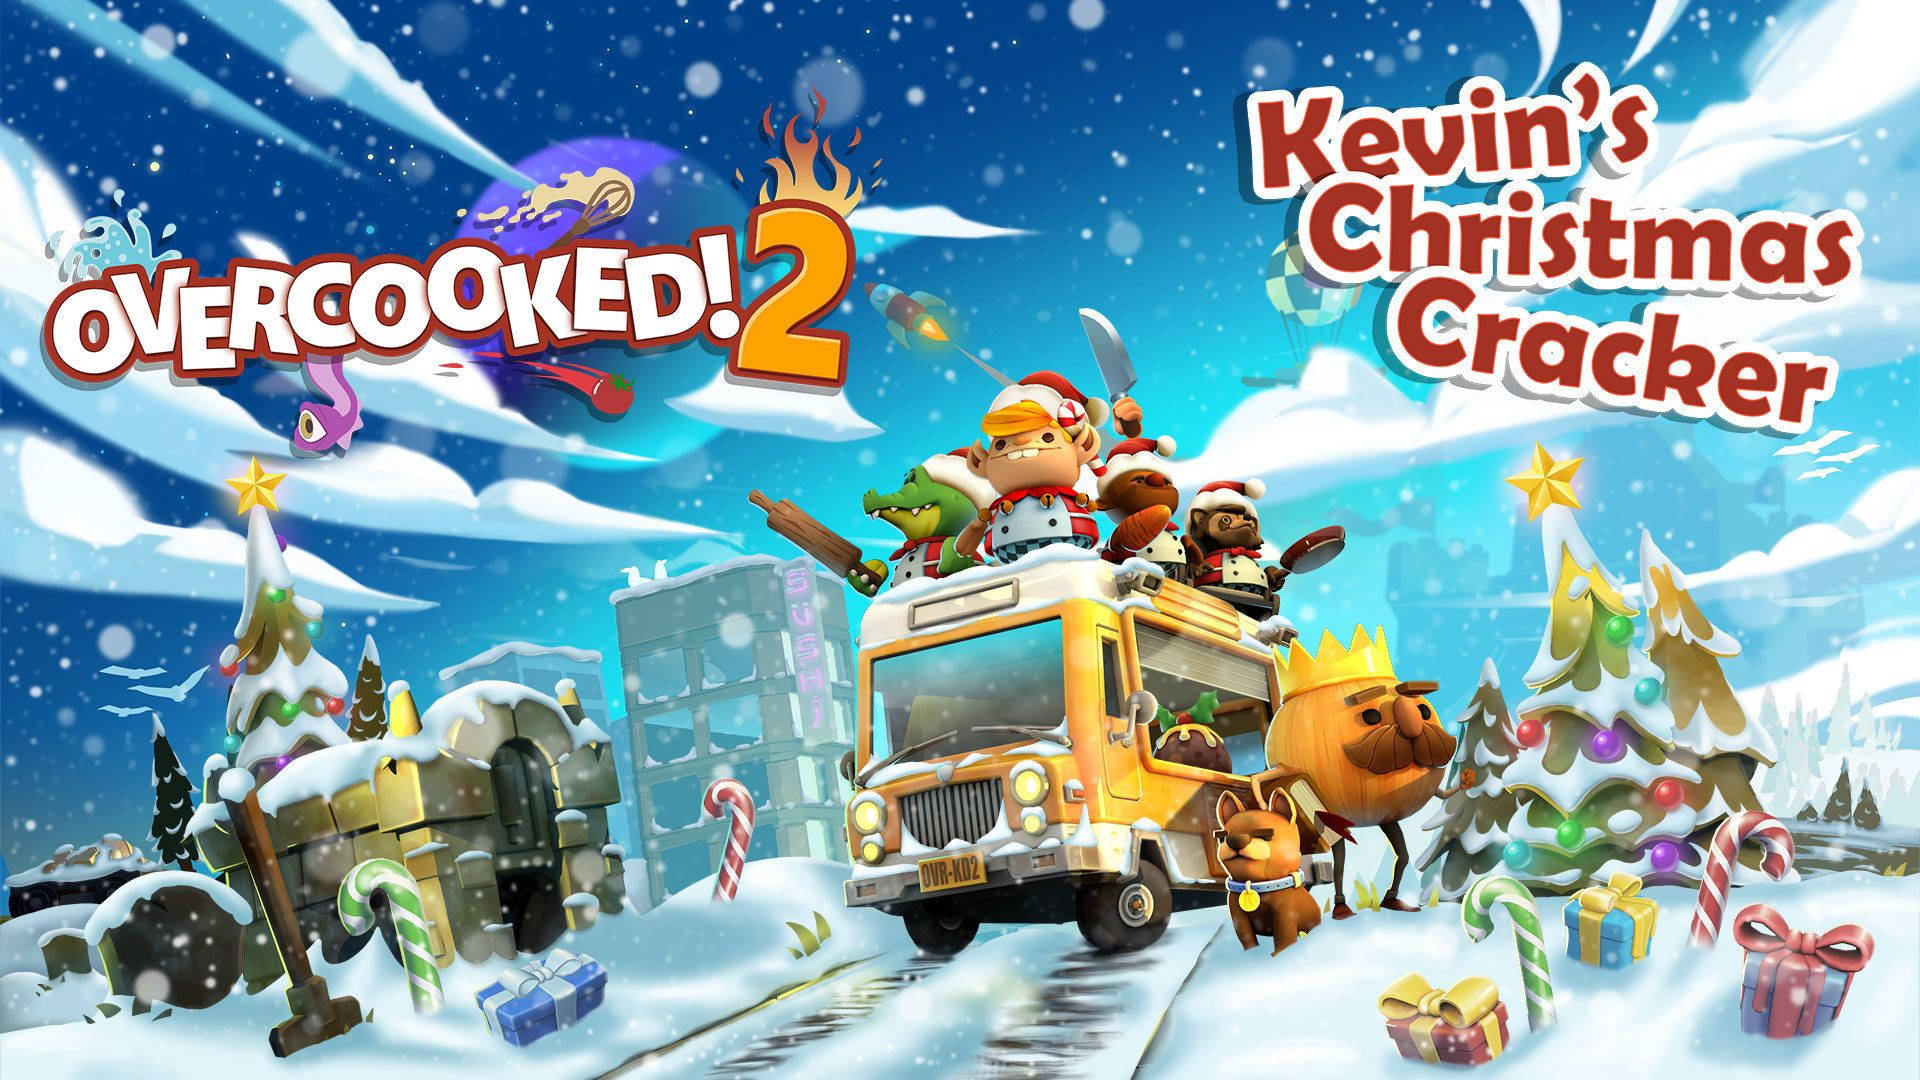 Overcooked 2 Kevin's Christmas Crackers